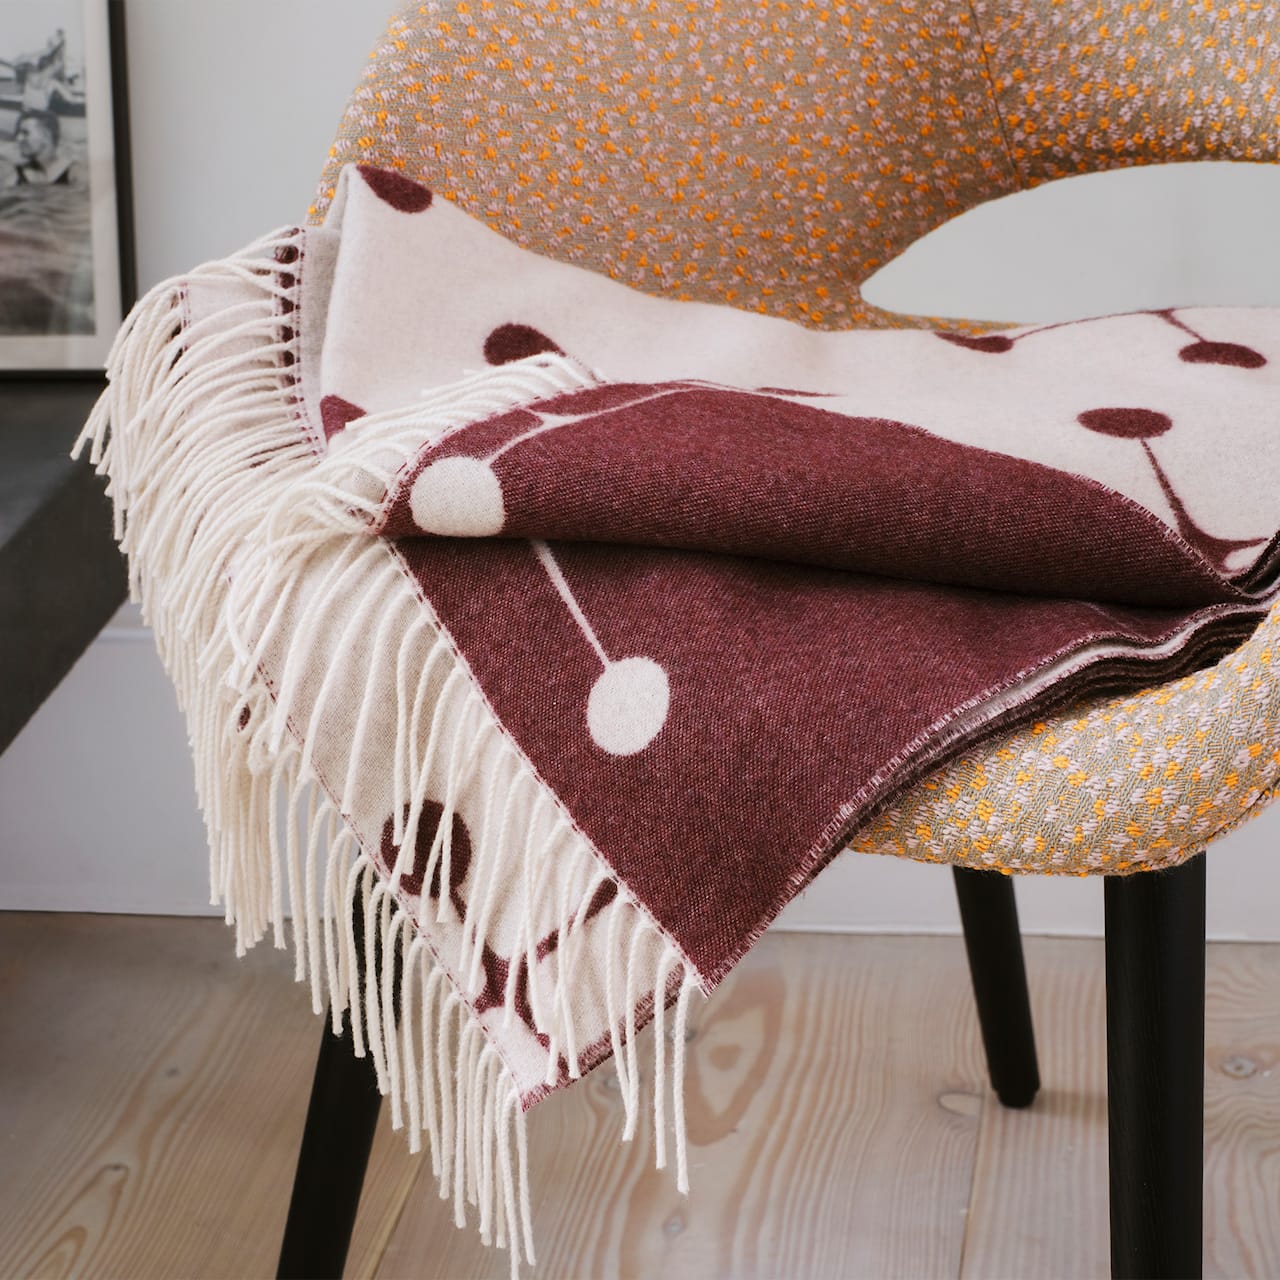 Eames Wool Blanket - Eames Special Collection